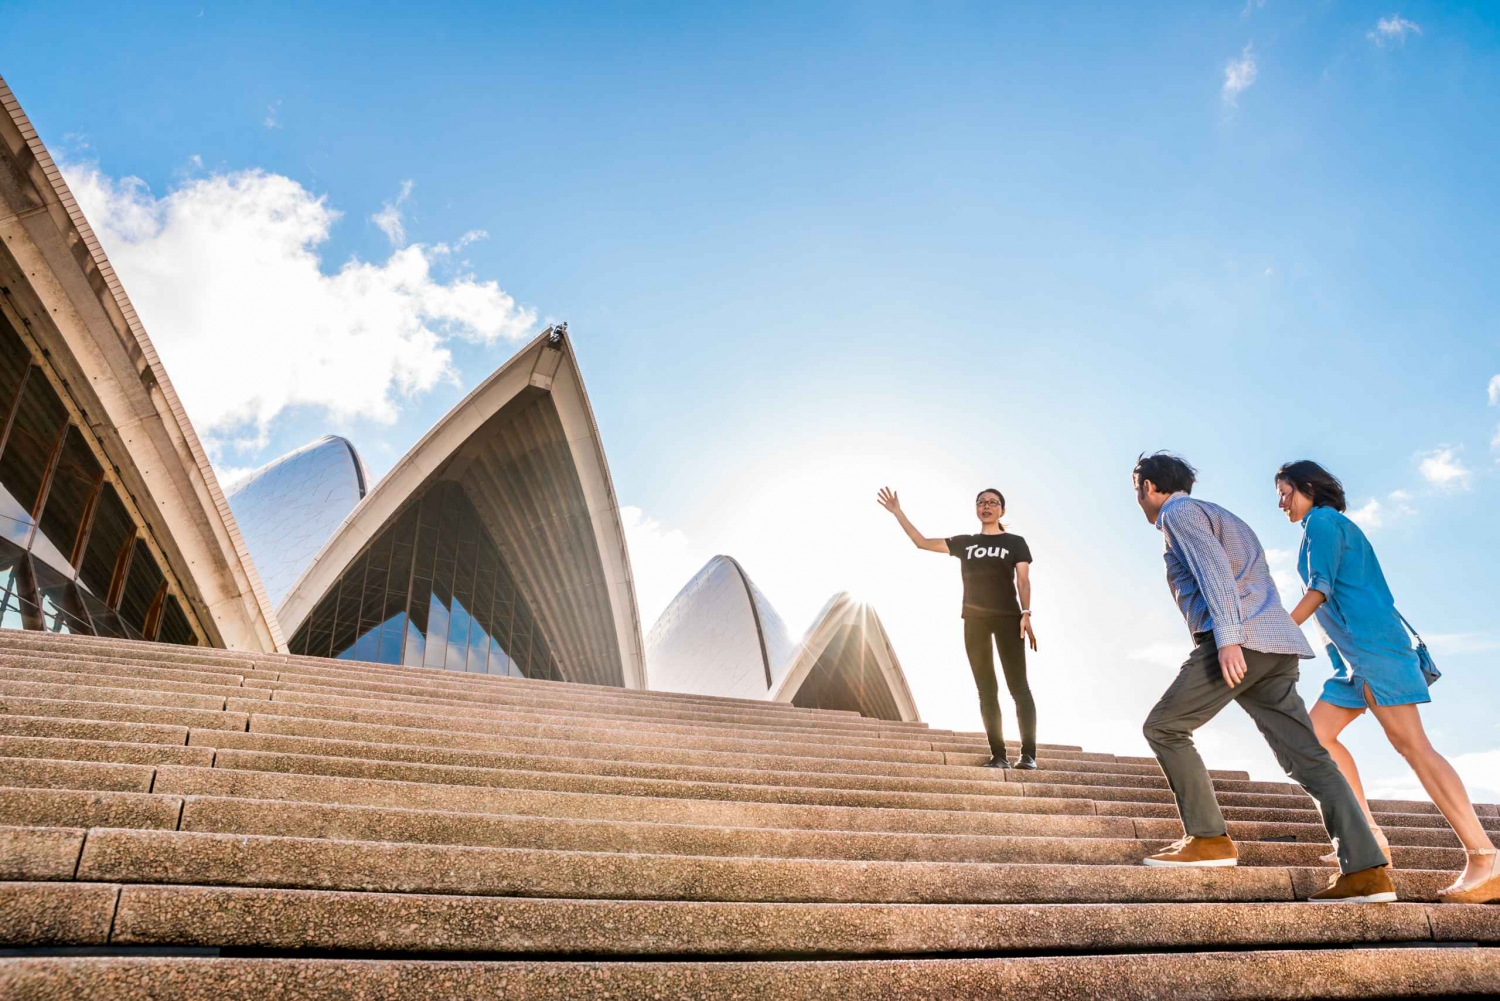 Sydney: Sydney Opera House Guided Architectural Tour